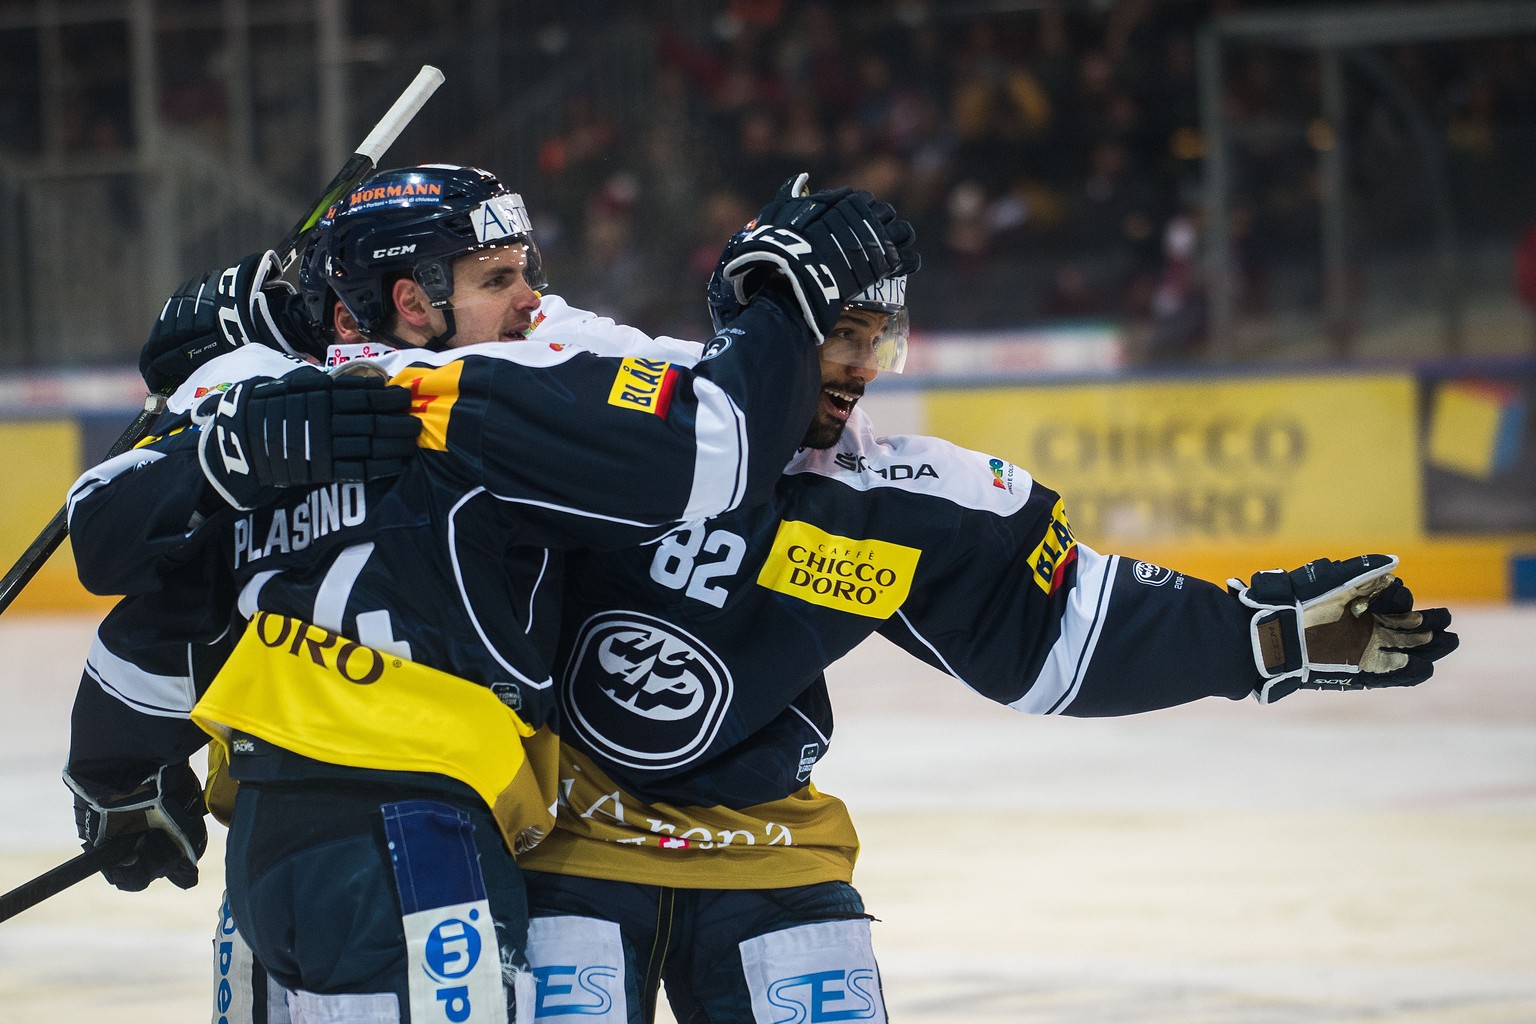 Ambri&#039;s player Nick Plastino left and Ambri&#039;s player Michael Ngoy right celebrate the 4 - 3 goal, during the preliminary round game of National League Swiss Championship 2018/19 between HC A ...